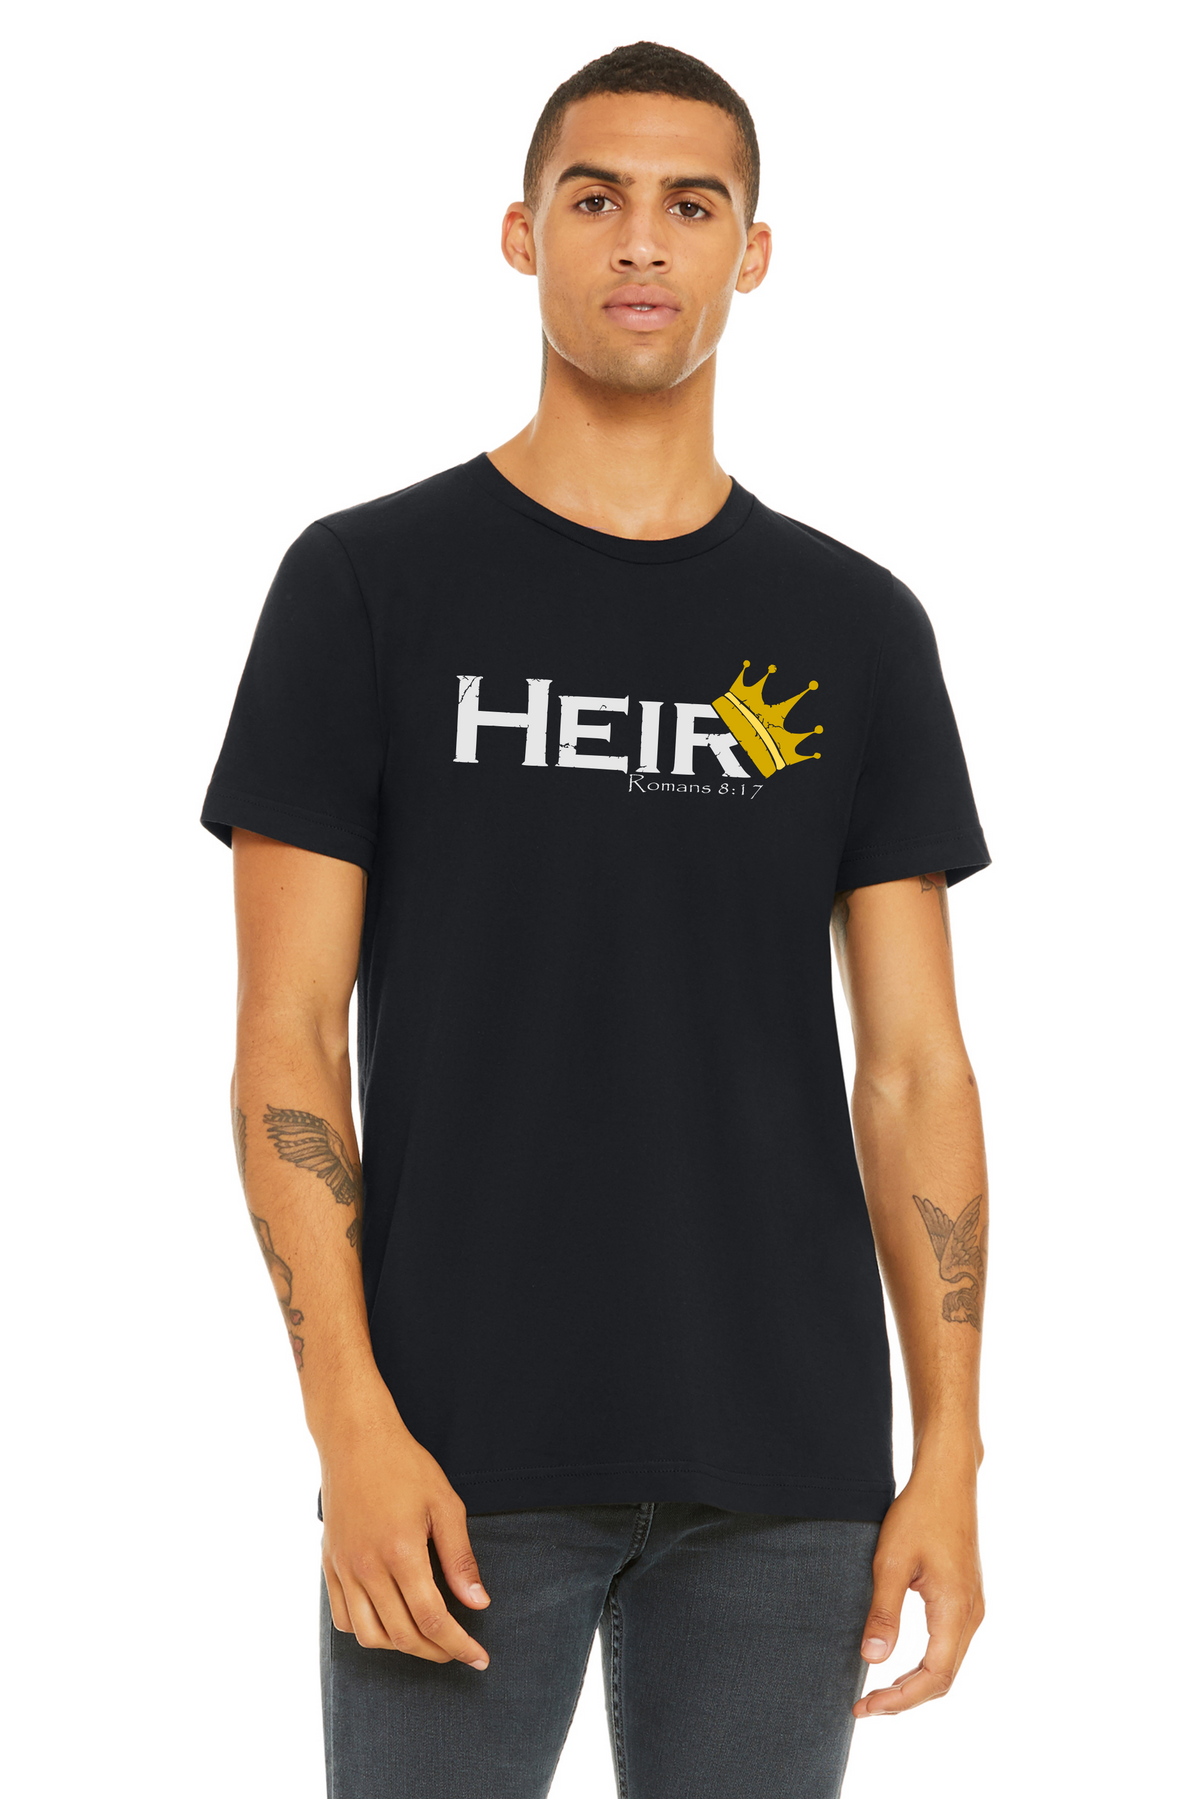 Heir of the King Adult T-shirt